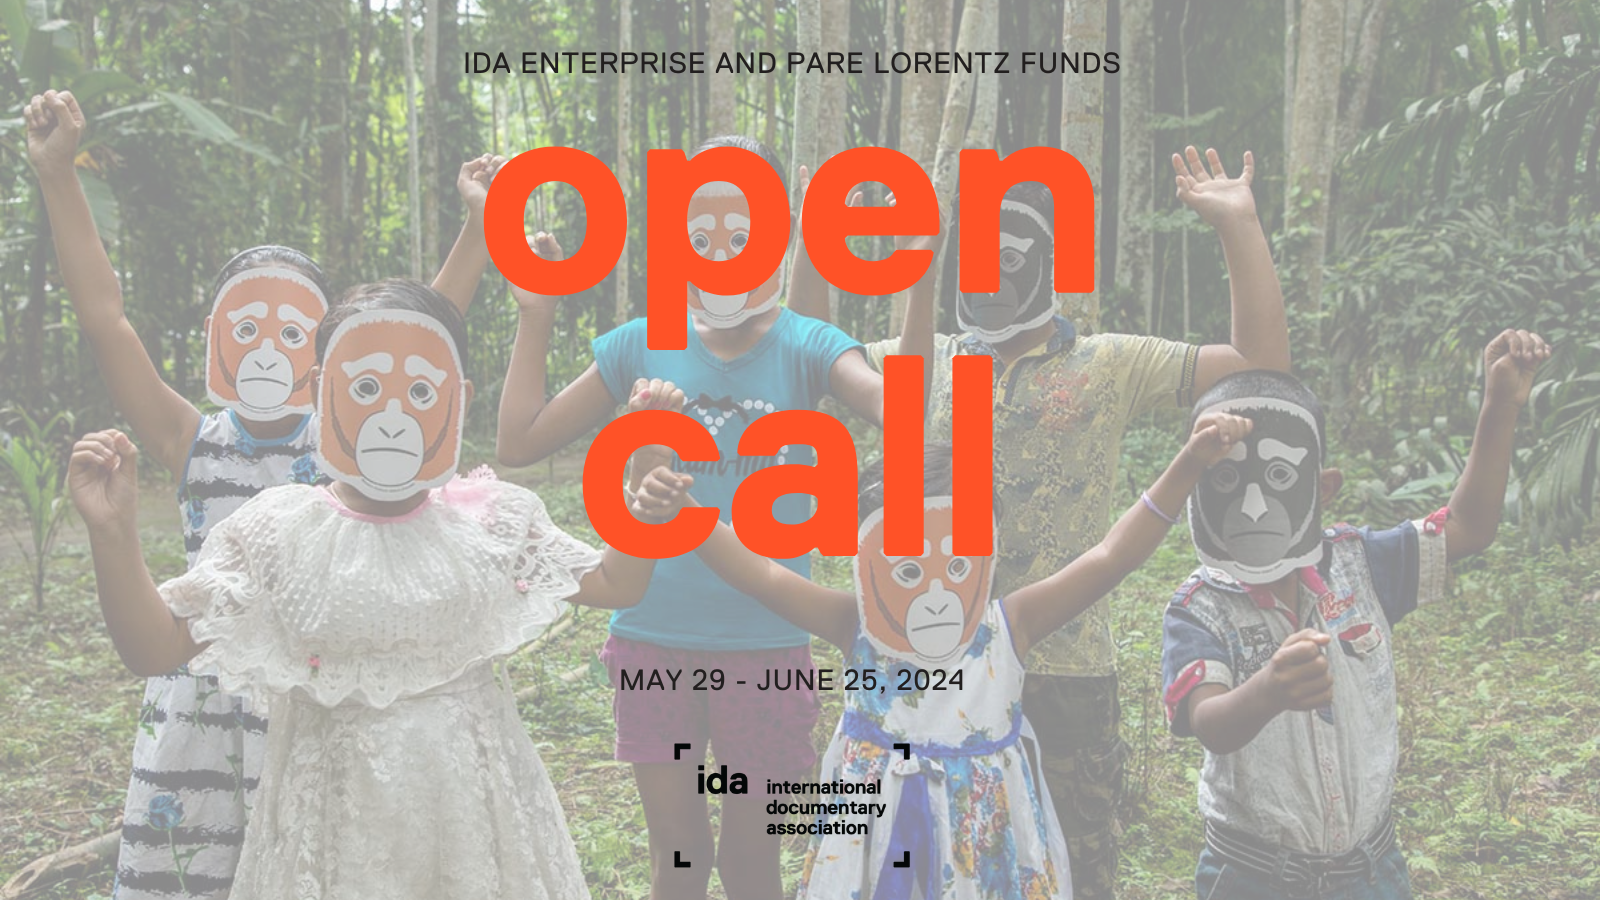 IDA Enterprise and Pare Lorentz Funds Open Call May 29 - June 25, 2024.